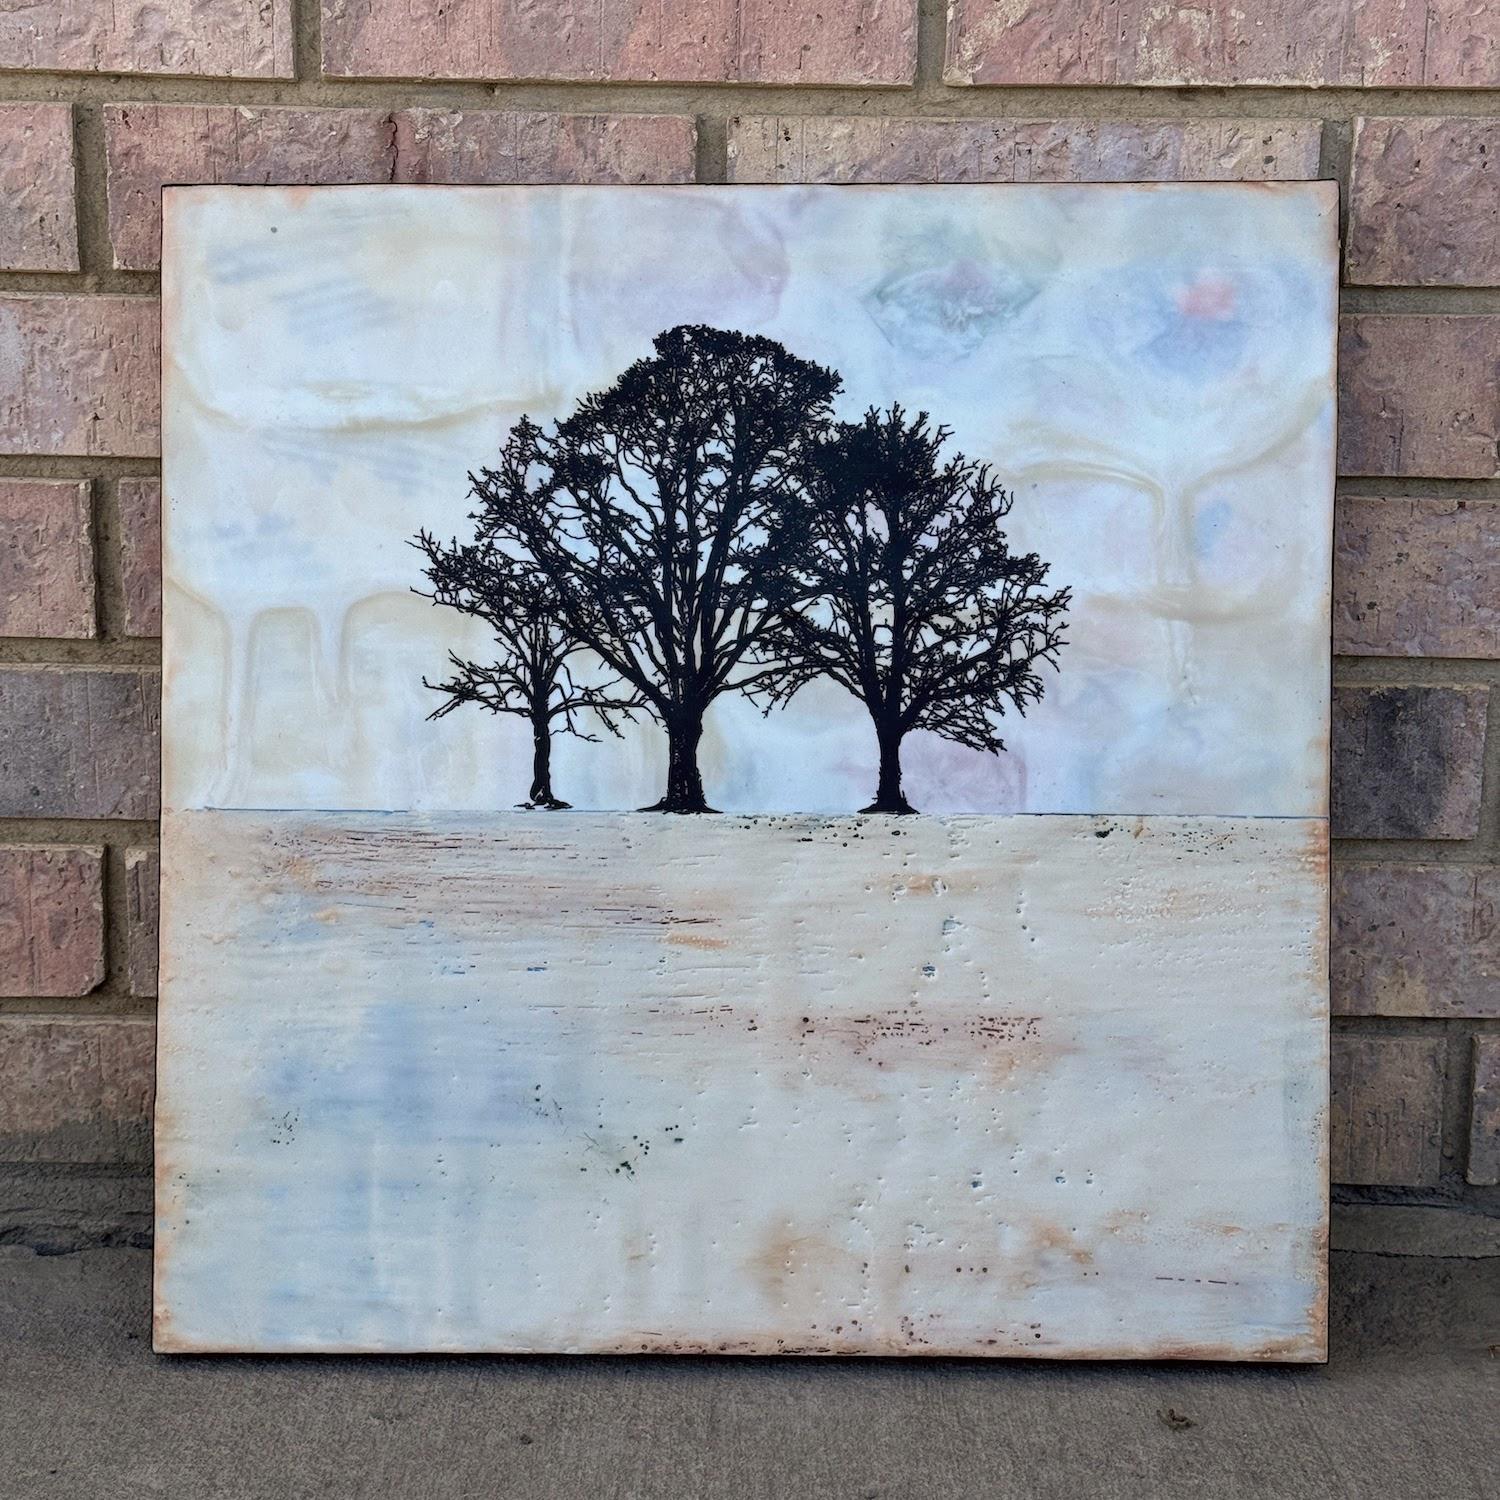 <p>Artist Comments<br>Dark contrasting silhouettes of trees stand prominently against the ethereal landscape. The field and sky exude a delicate presence, adding to the serene atmosphere of the scene. Artist Shari Lyon creates the piece using paint